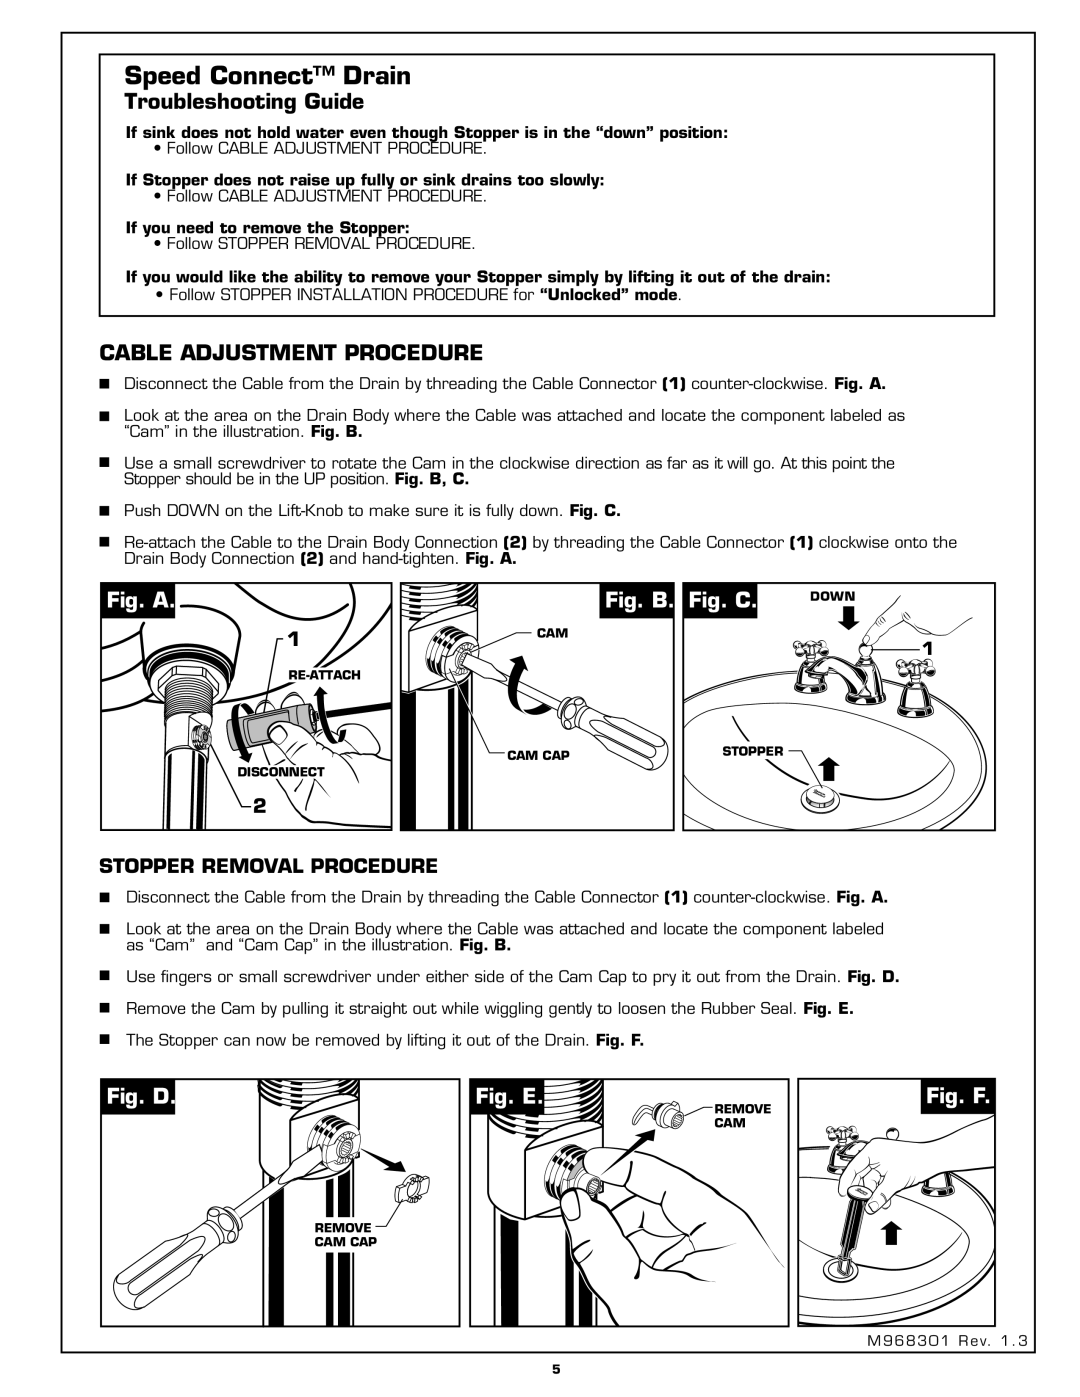 American Standard 2373.821 Troubleshooting Guide, Cable Adjustment Procedure, Fig. A, Fig. B. Fig. C, Fig. D, Fig. E 